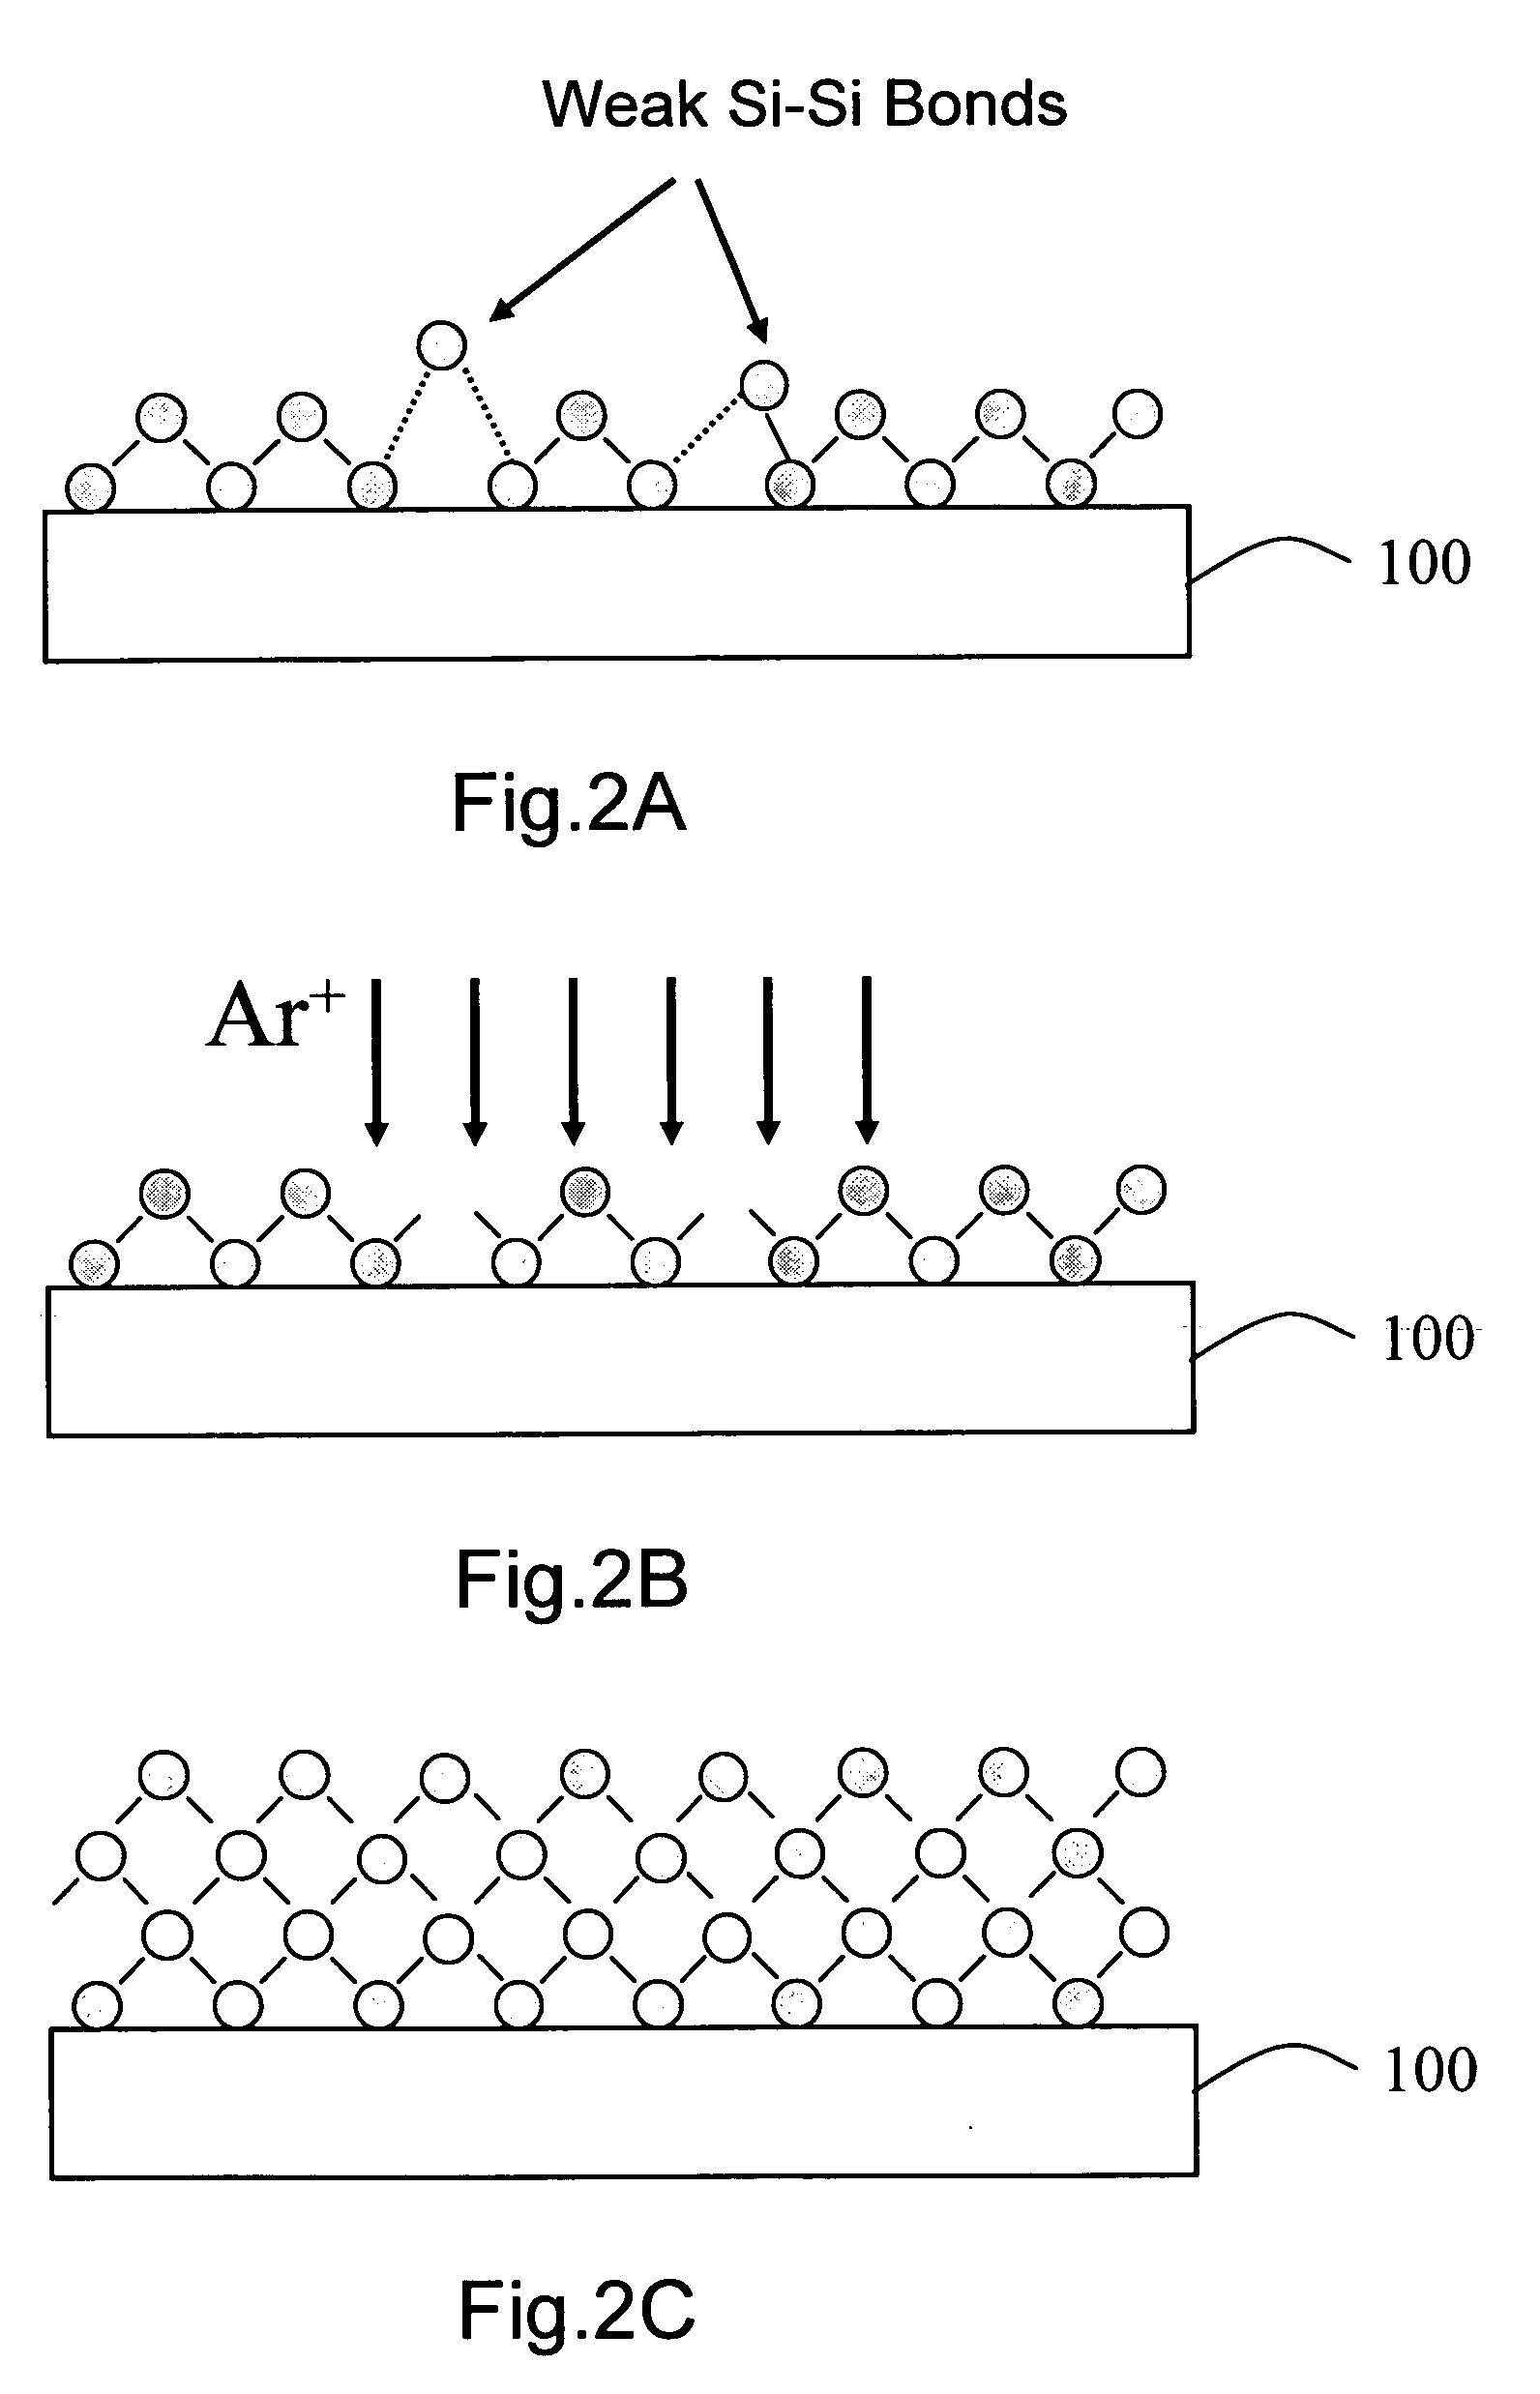 Method for forming a microcrystalline silicon film